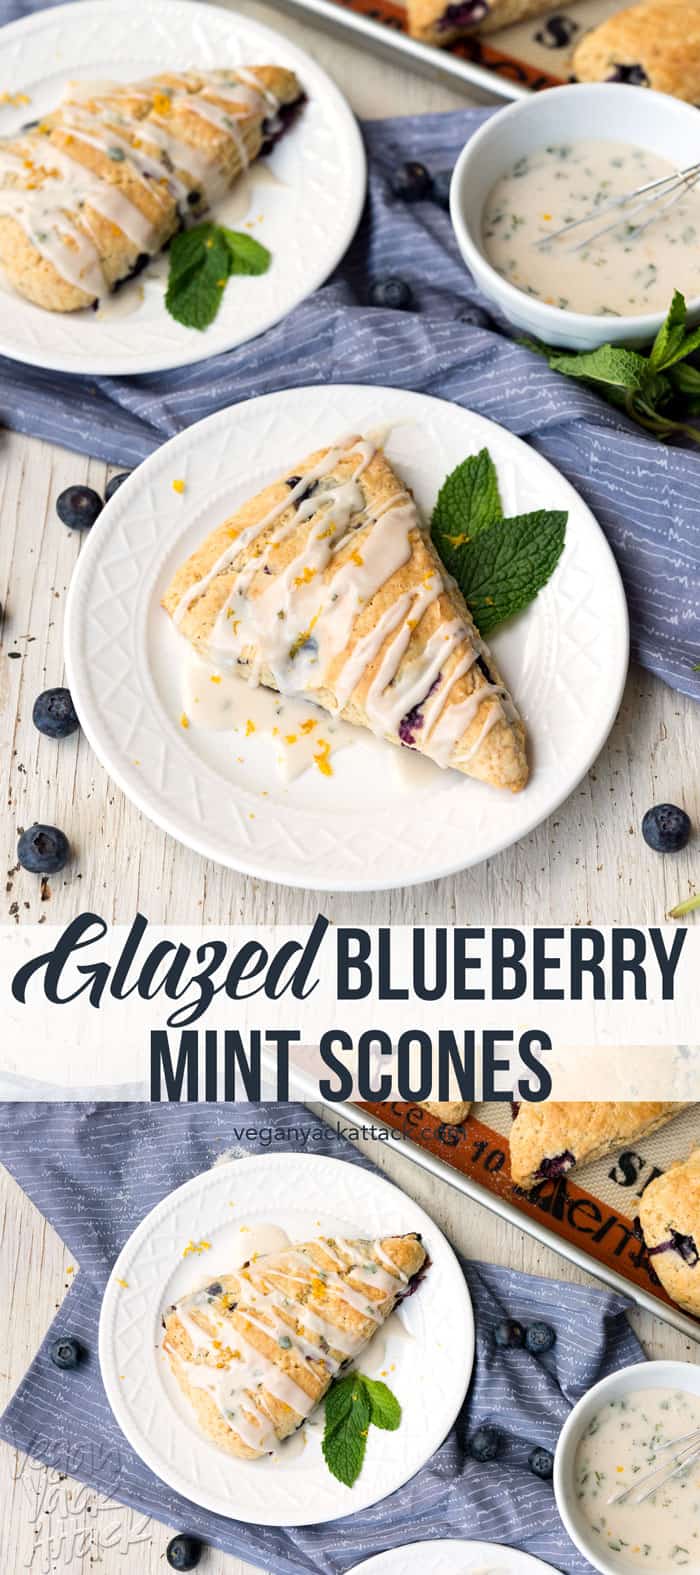 These Glazed Blueberry Mint Scones are the perfect Spring breakfast, paired with tea or a strong cup of coffee! Surprisingly easy-to-make, too. #Sweet4MotherNature Vegan, Soy-free, Dairy-free